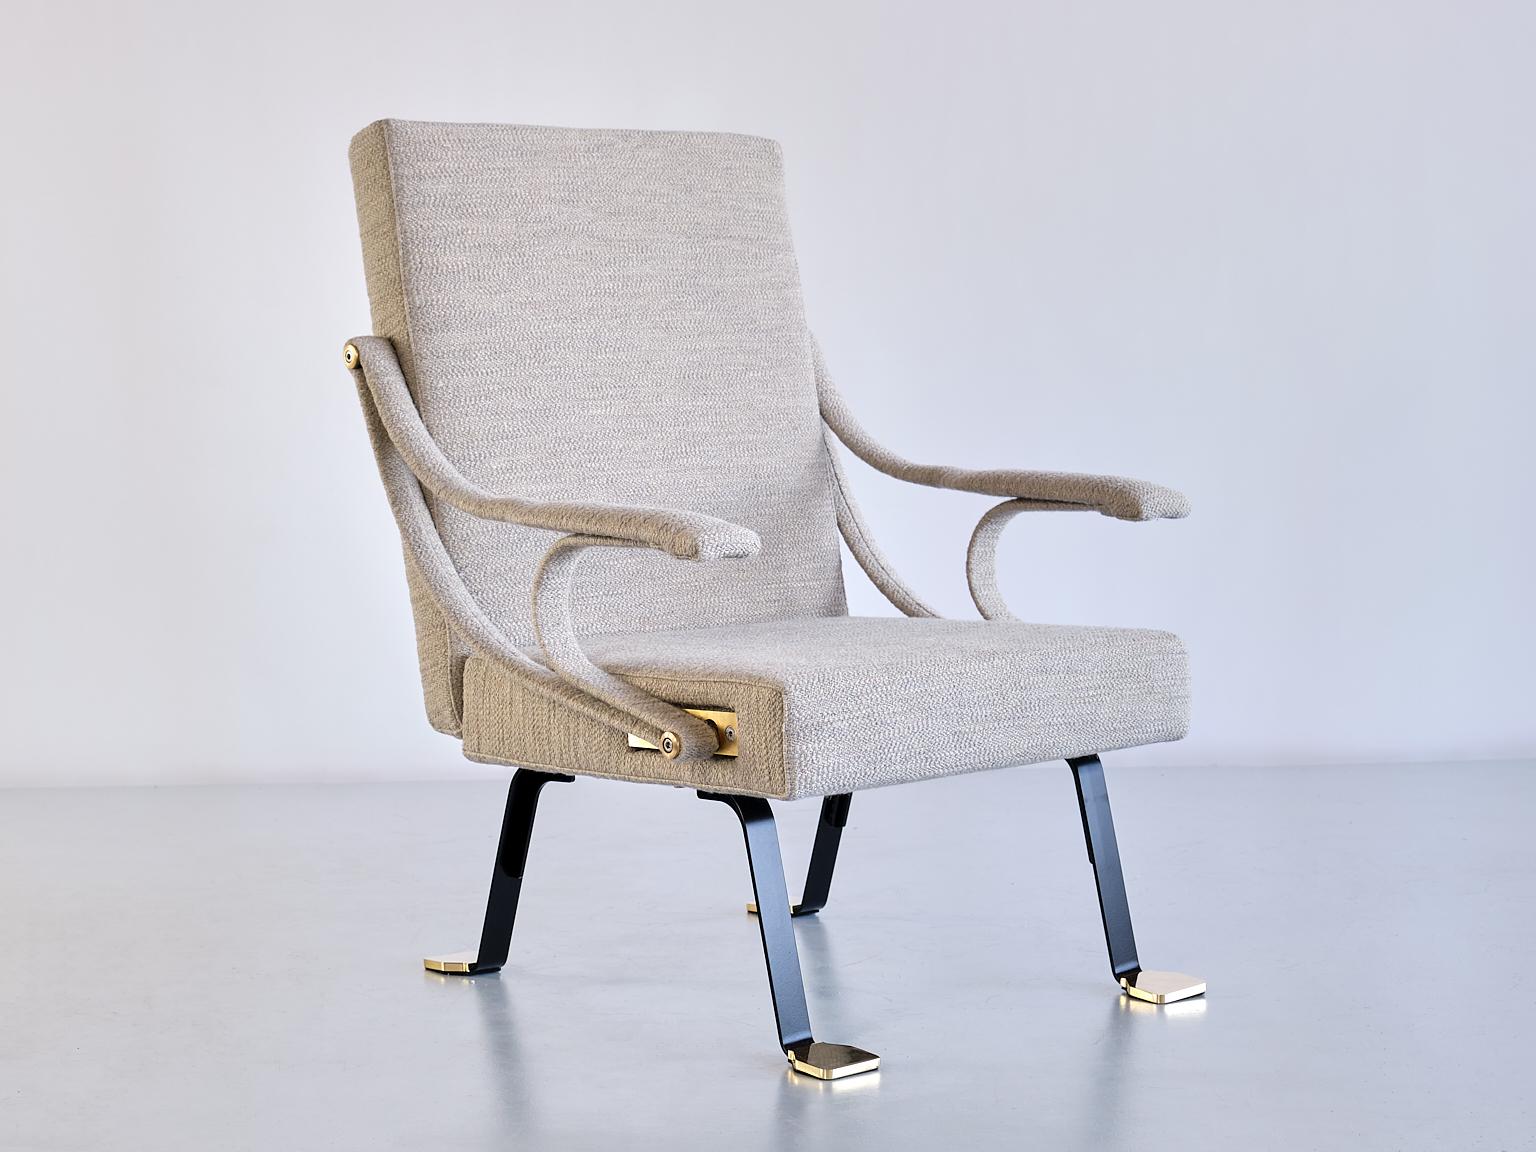 Designed by Ignazio Gardella in 1957, the Digamma lounge chair is a comfortable chair with roots in the late Italian modernist tradition.
Its rational construction features two geometric sections - the rectangular upholstered back and seat - bound